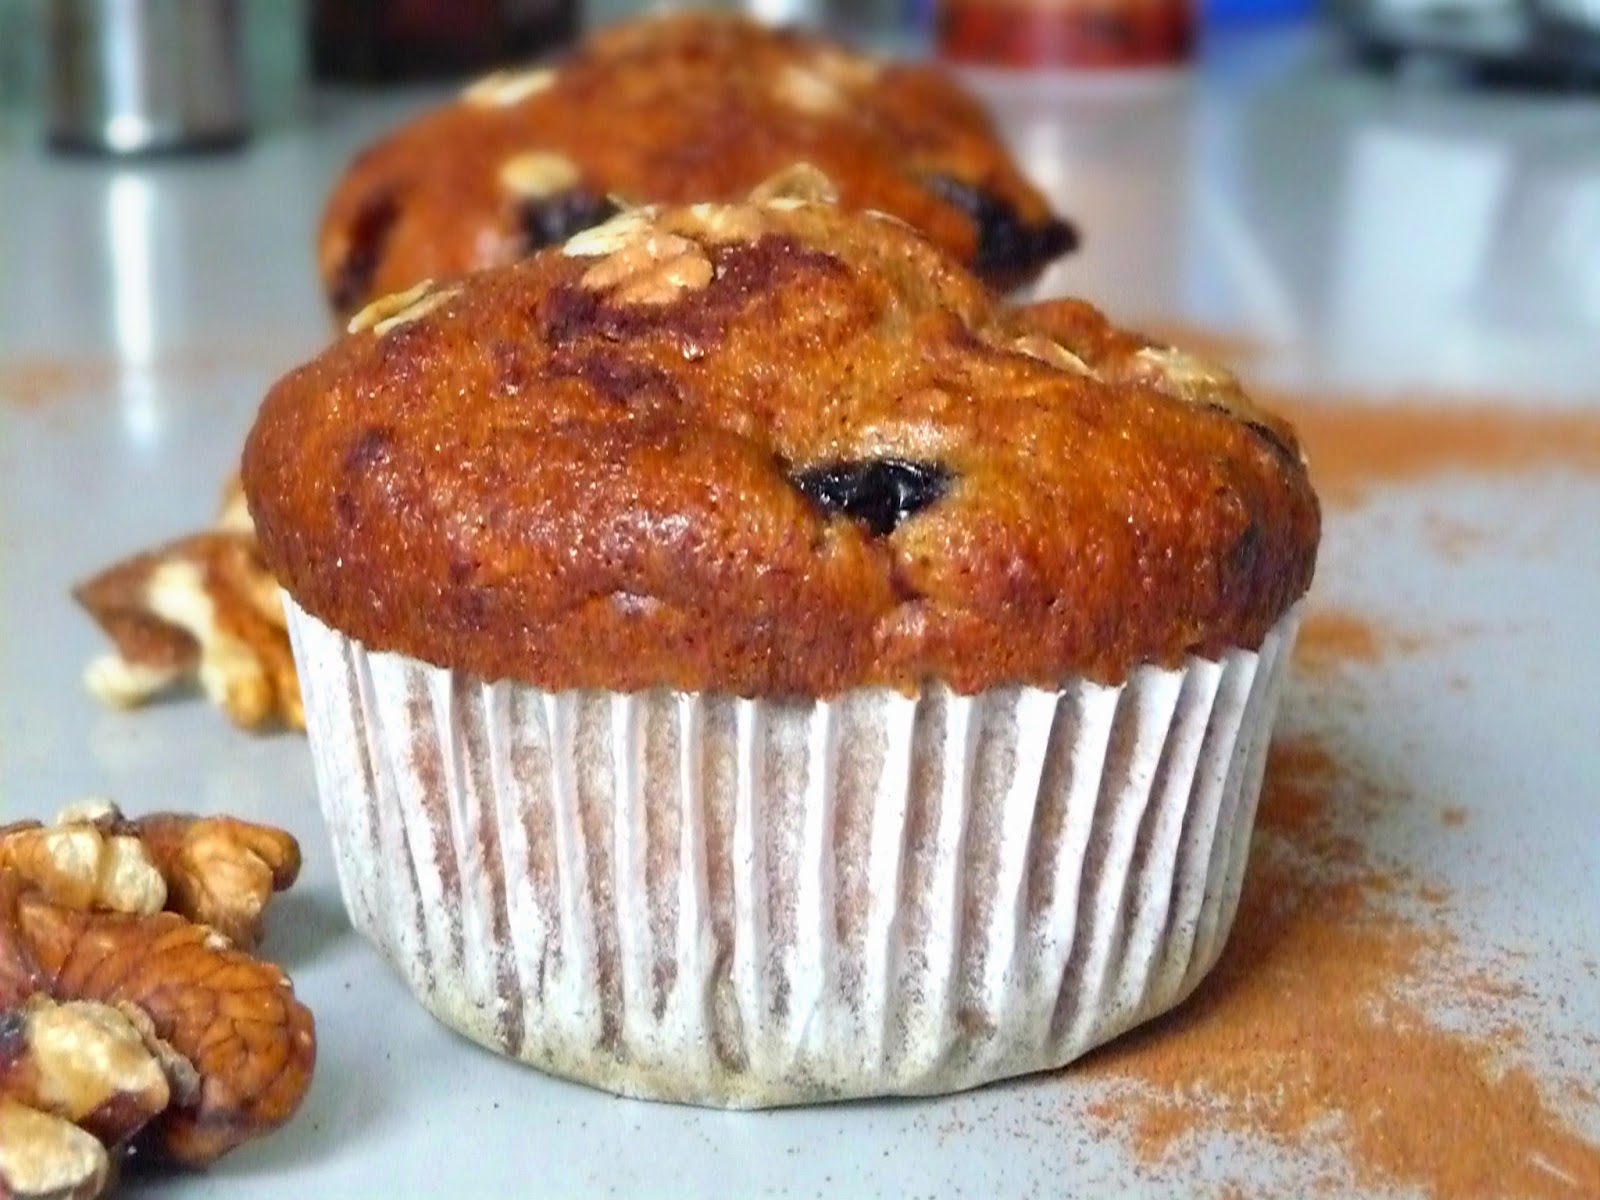 http://theseamanmom.com/whole-wheat-muesli-muffins-with-blueberries/